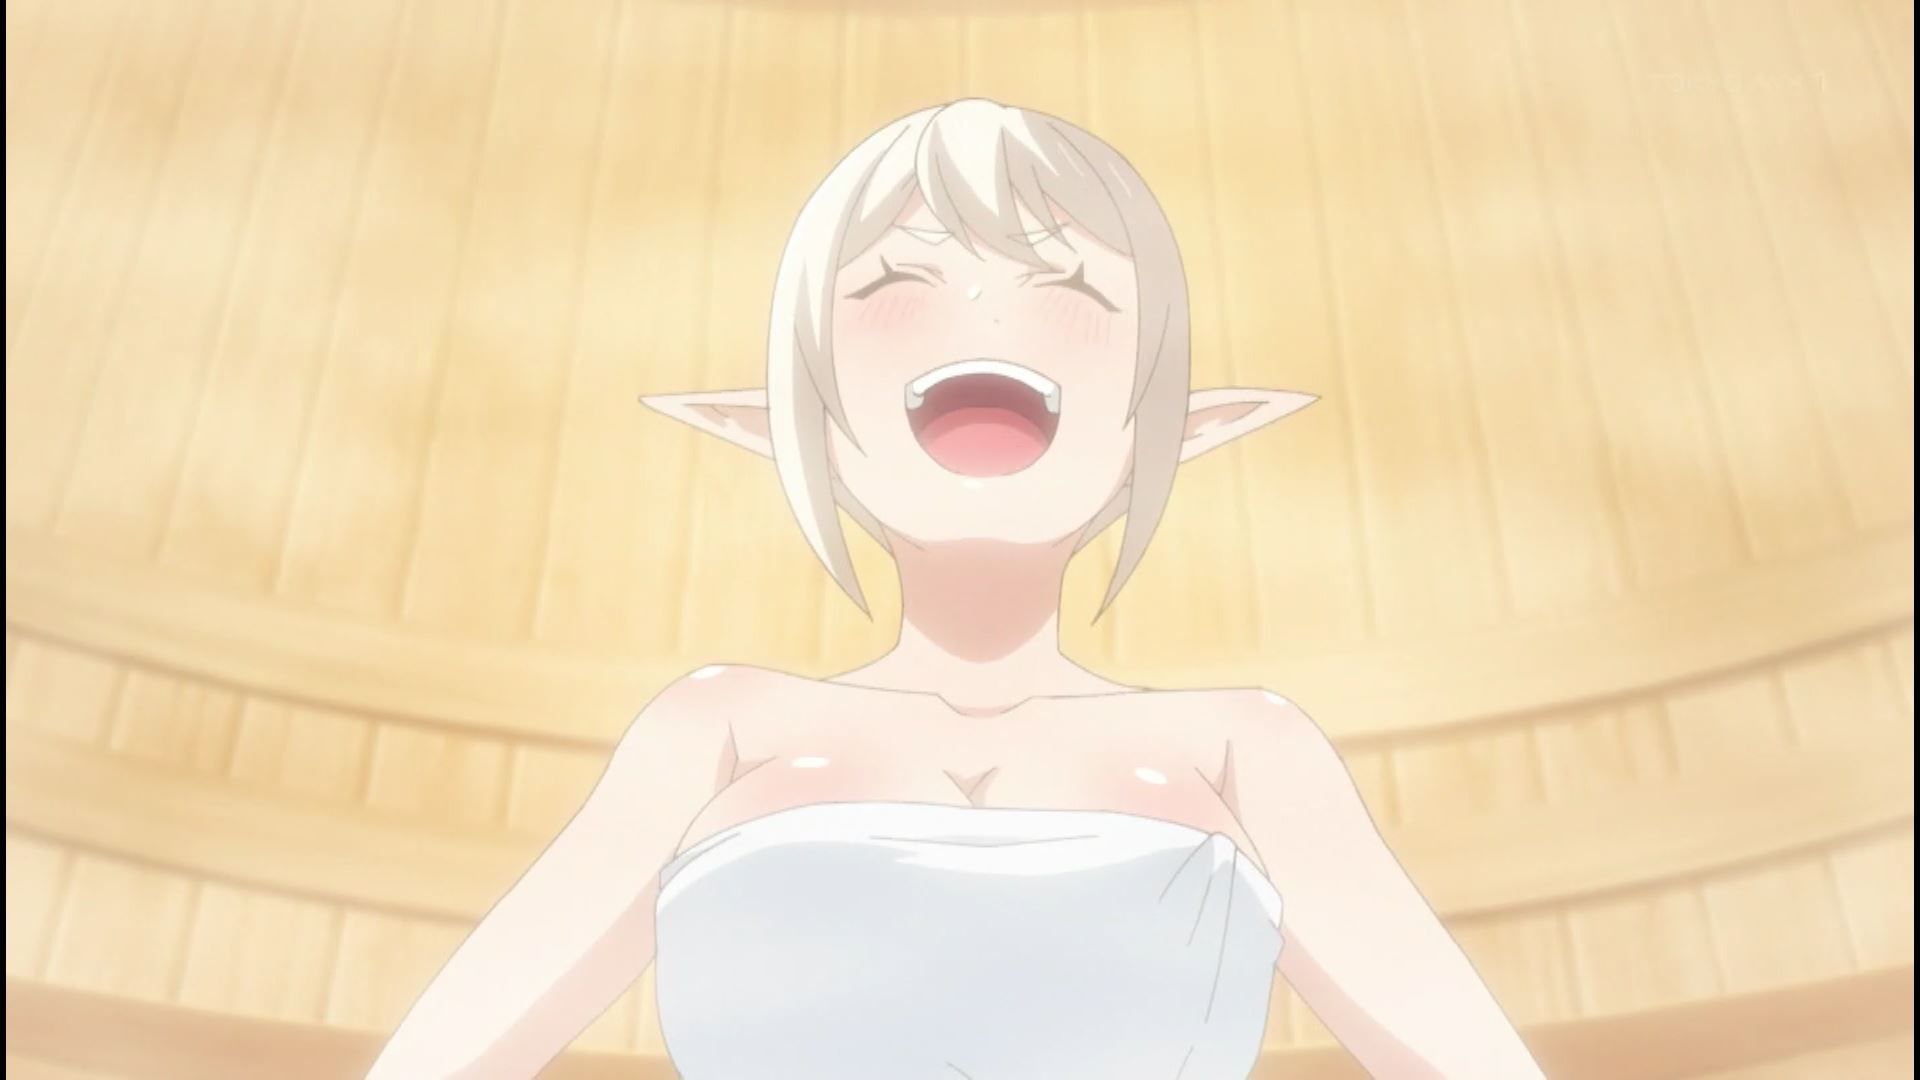 In episode 4 of the anime "True Companion", there is an erotic scene where you enter the sauna naked with an erotic boob girl! 18